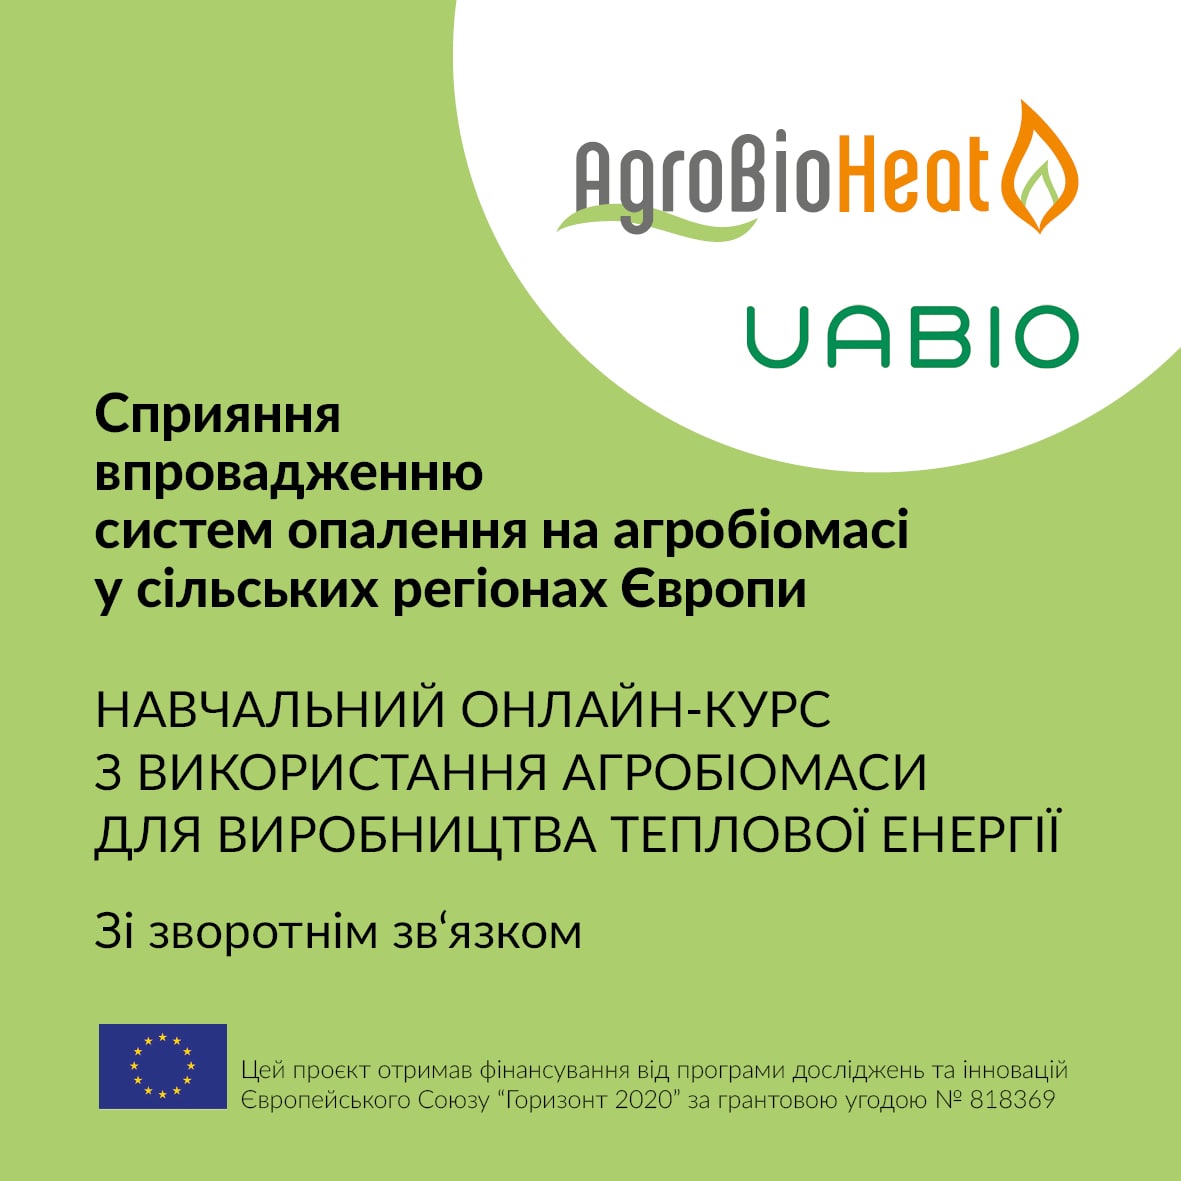 Agrobioheat project: online course